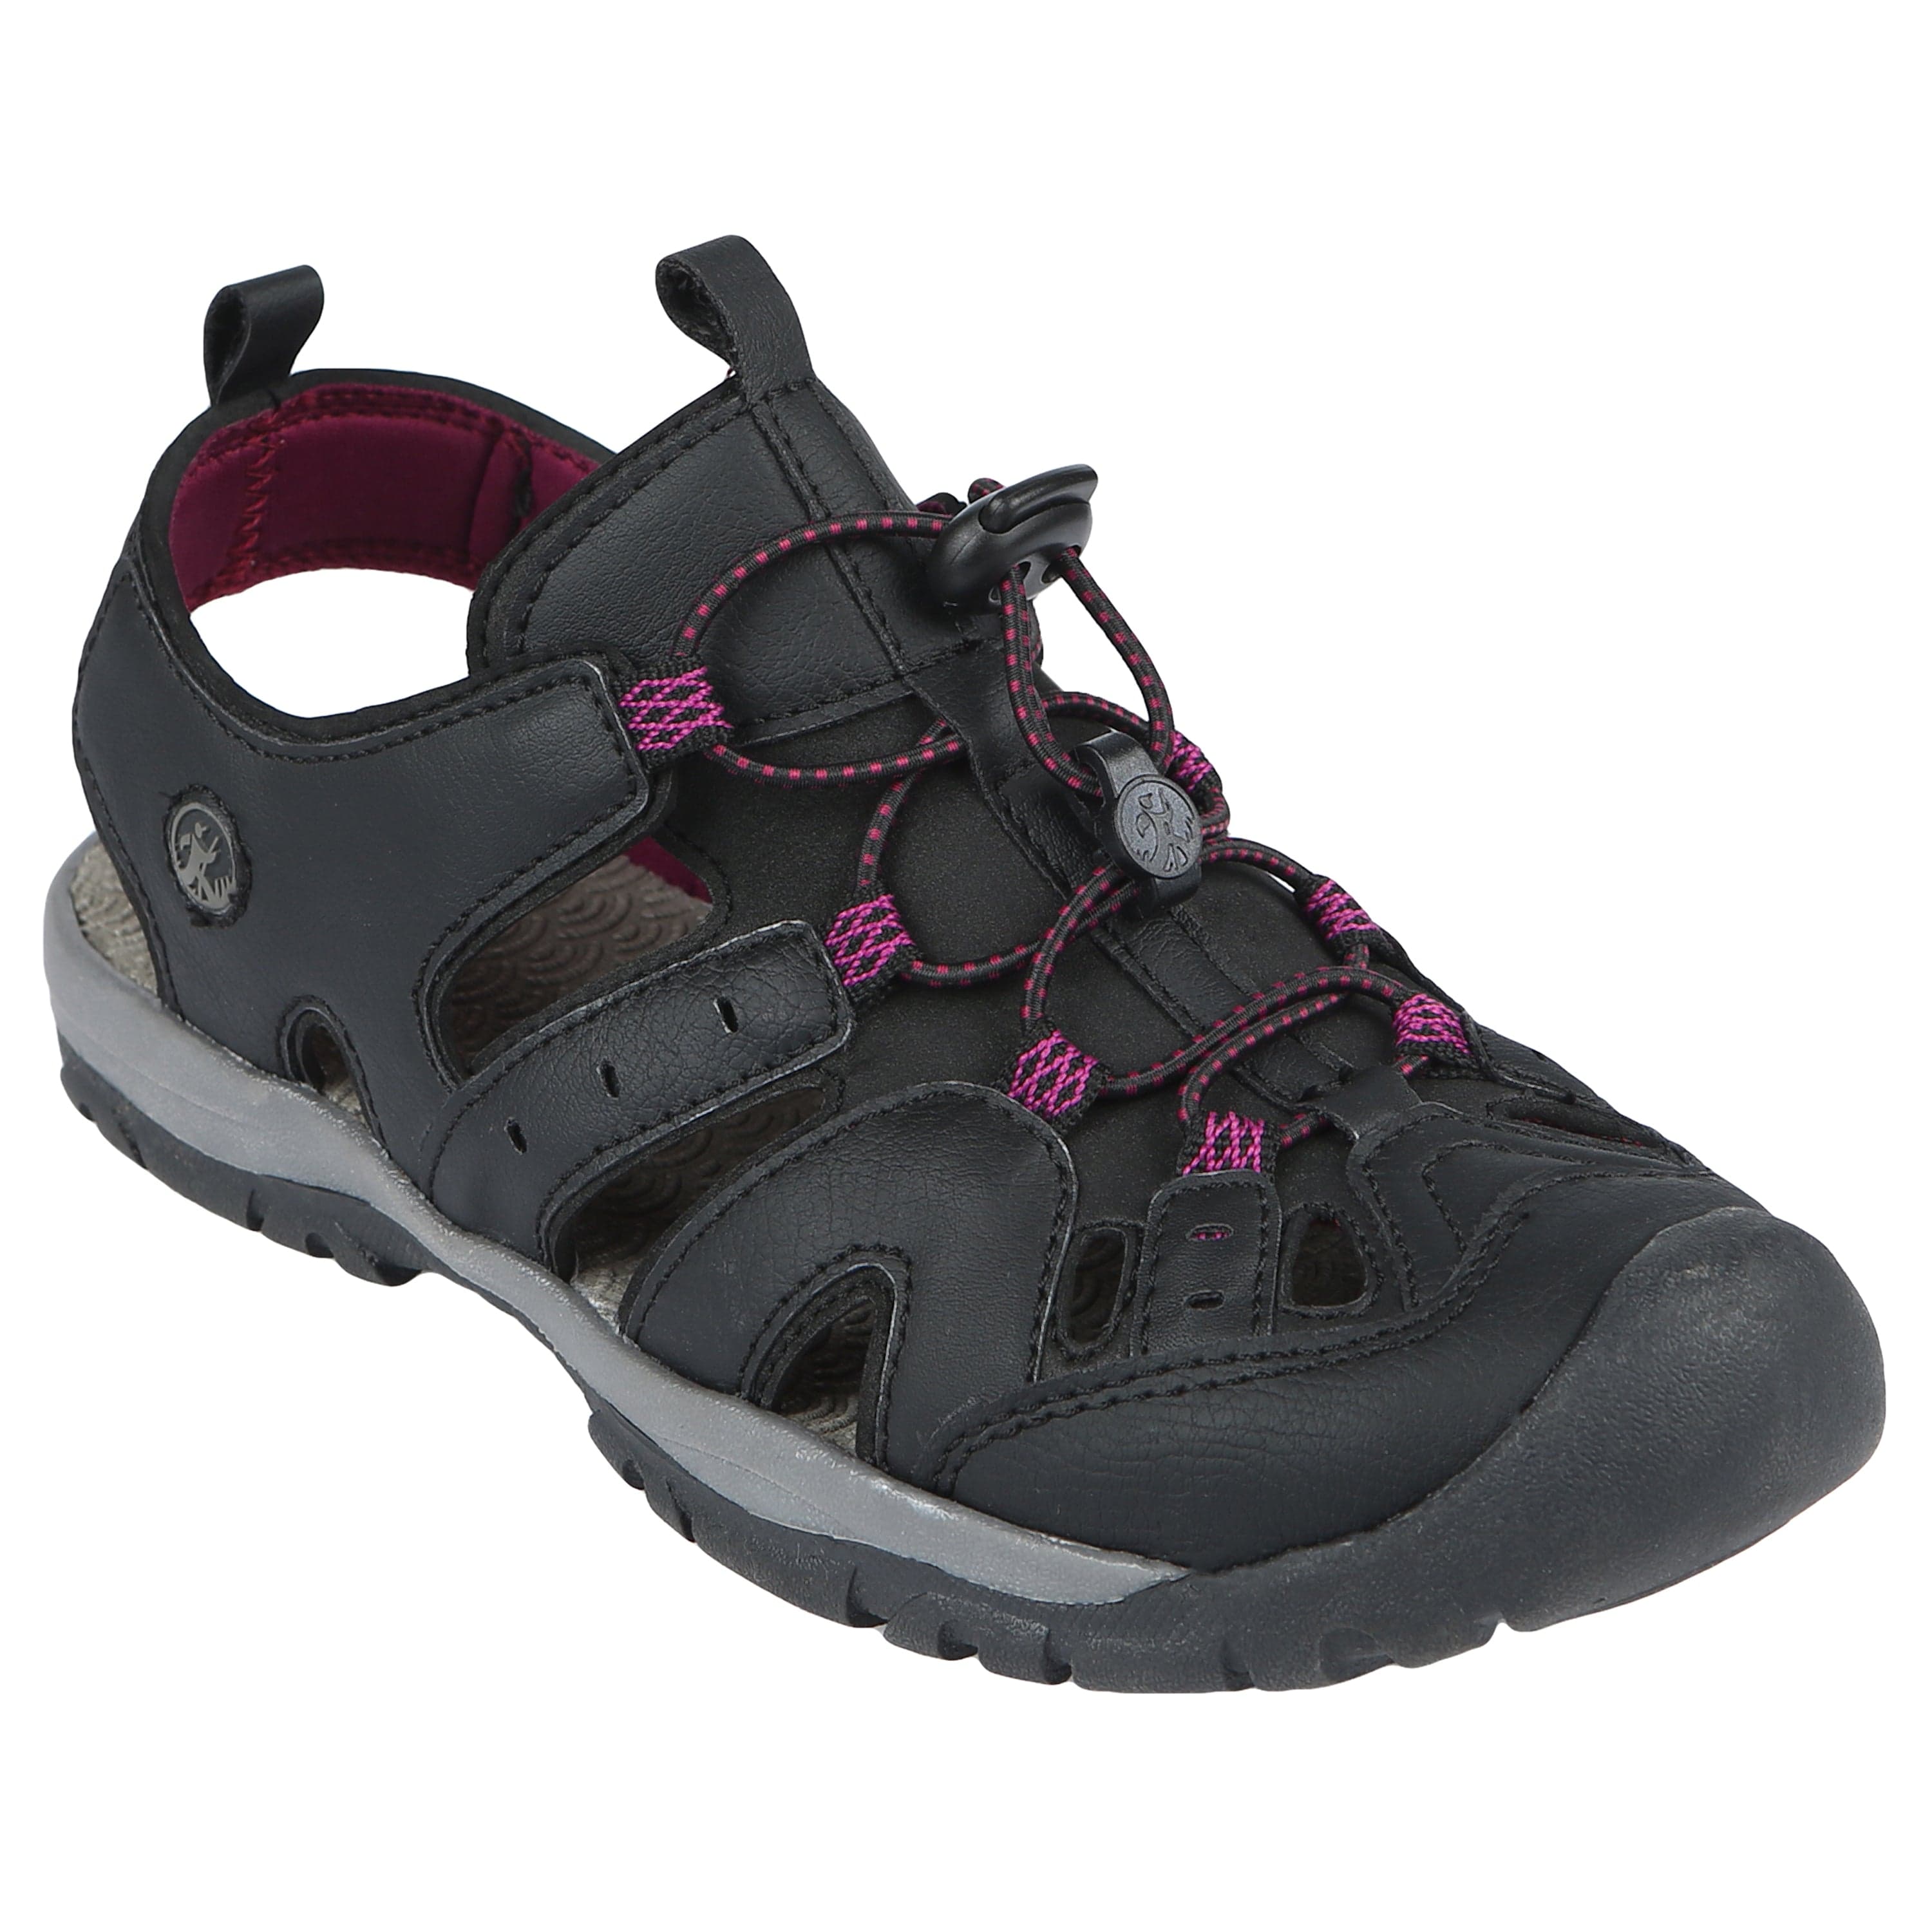 Northside Men's Burke 3.0 Closed Toe Sport Sandals at Tractor Supply Co.